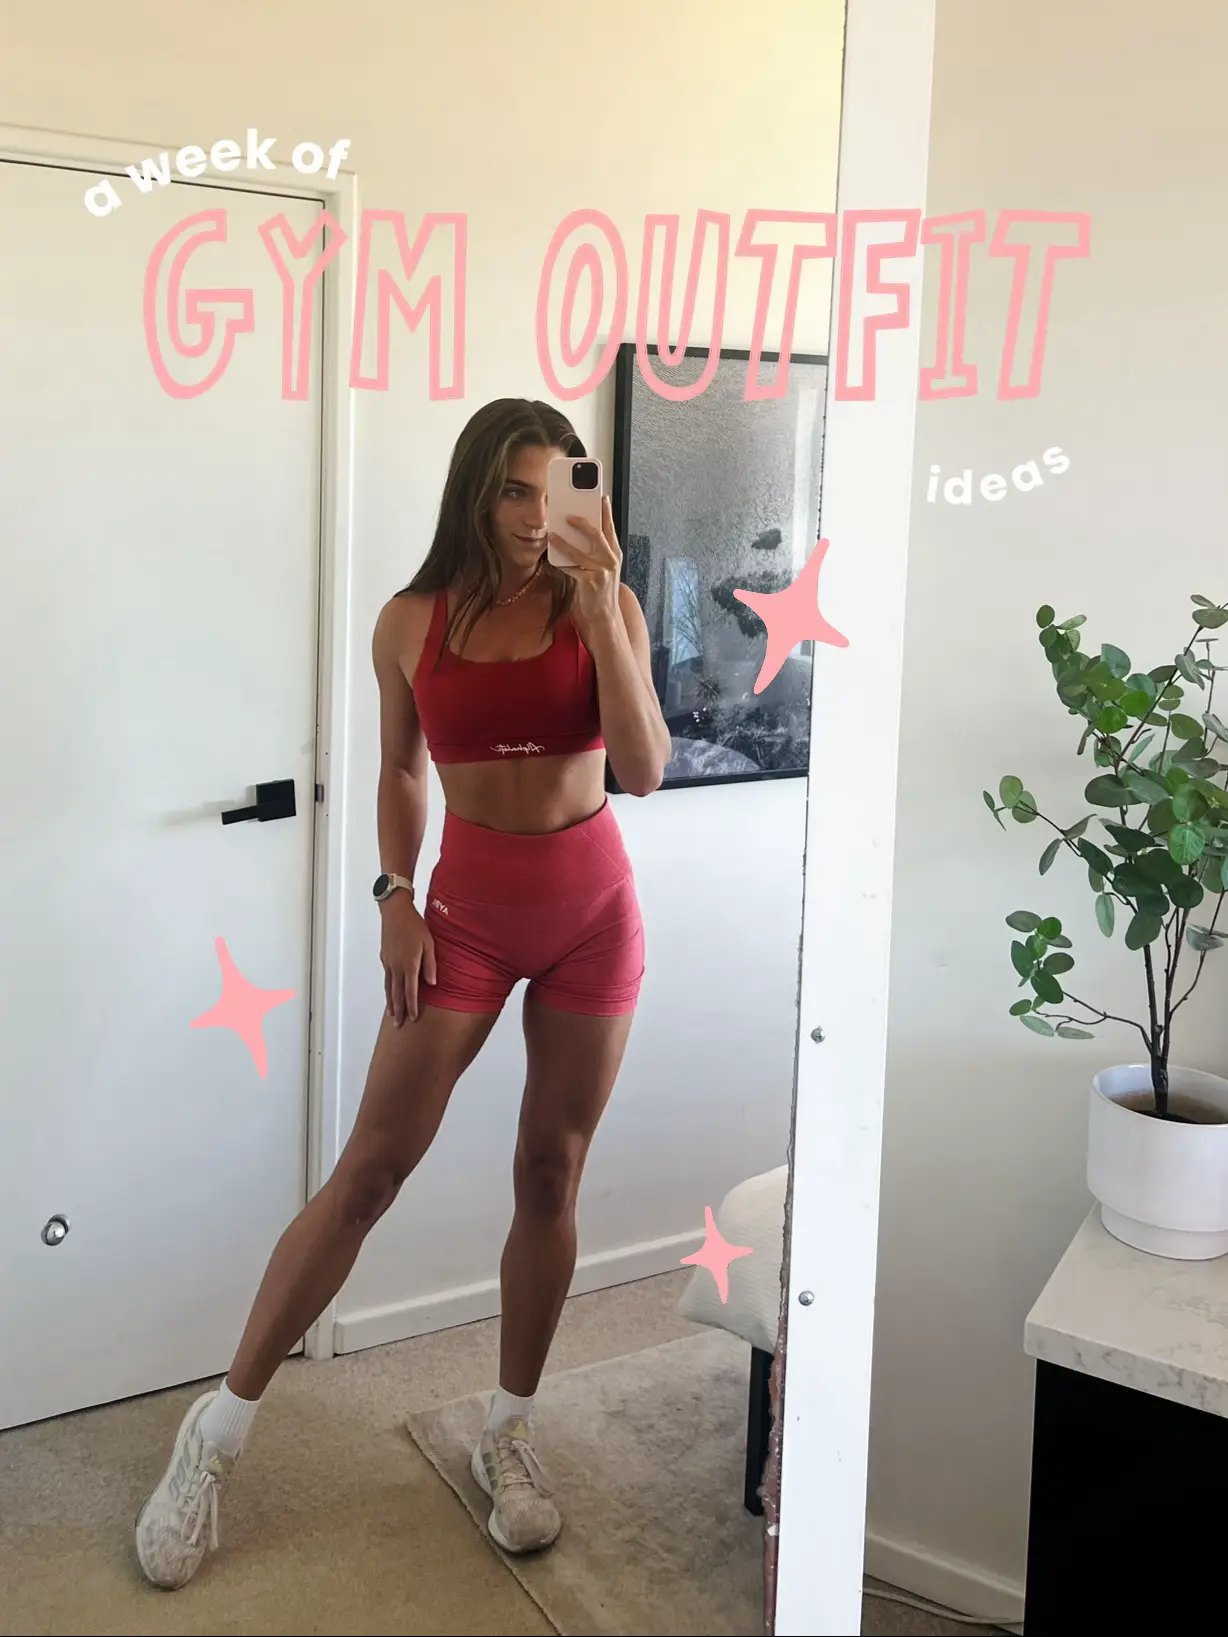 my gym fits of the week 💪🏼, Gallery posted by Kailey Viray